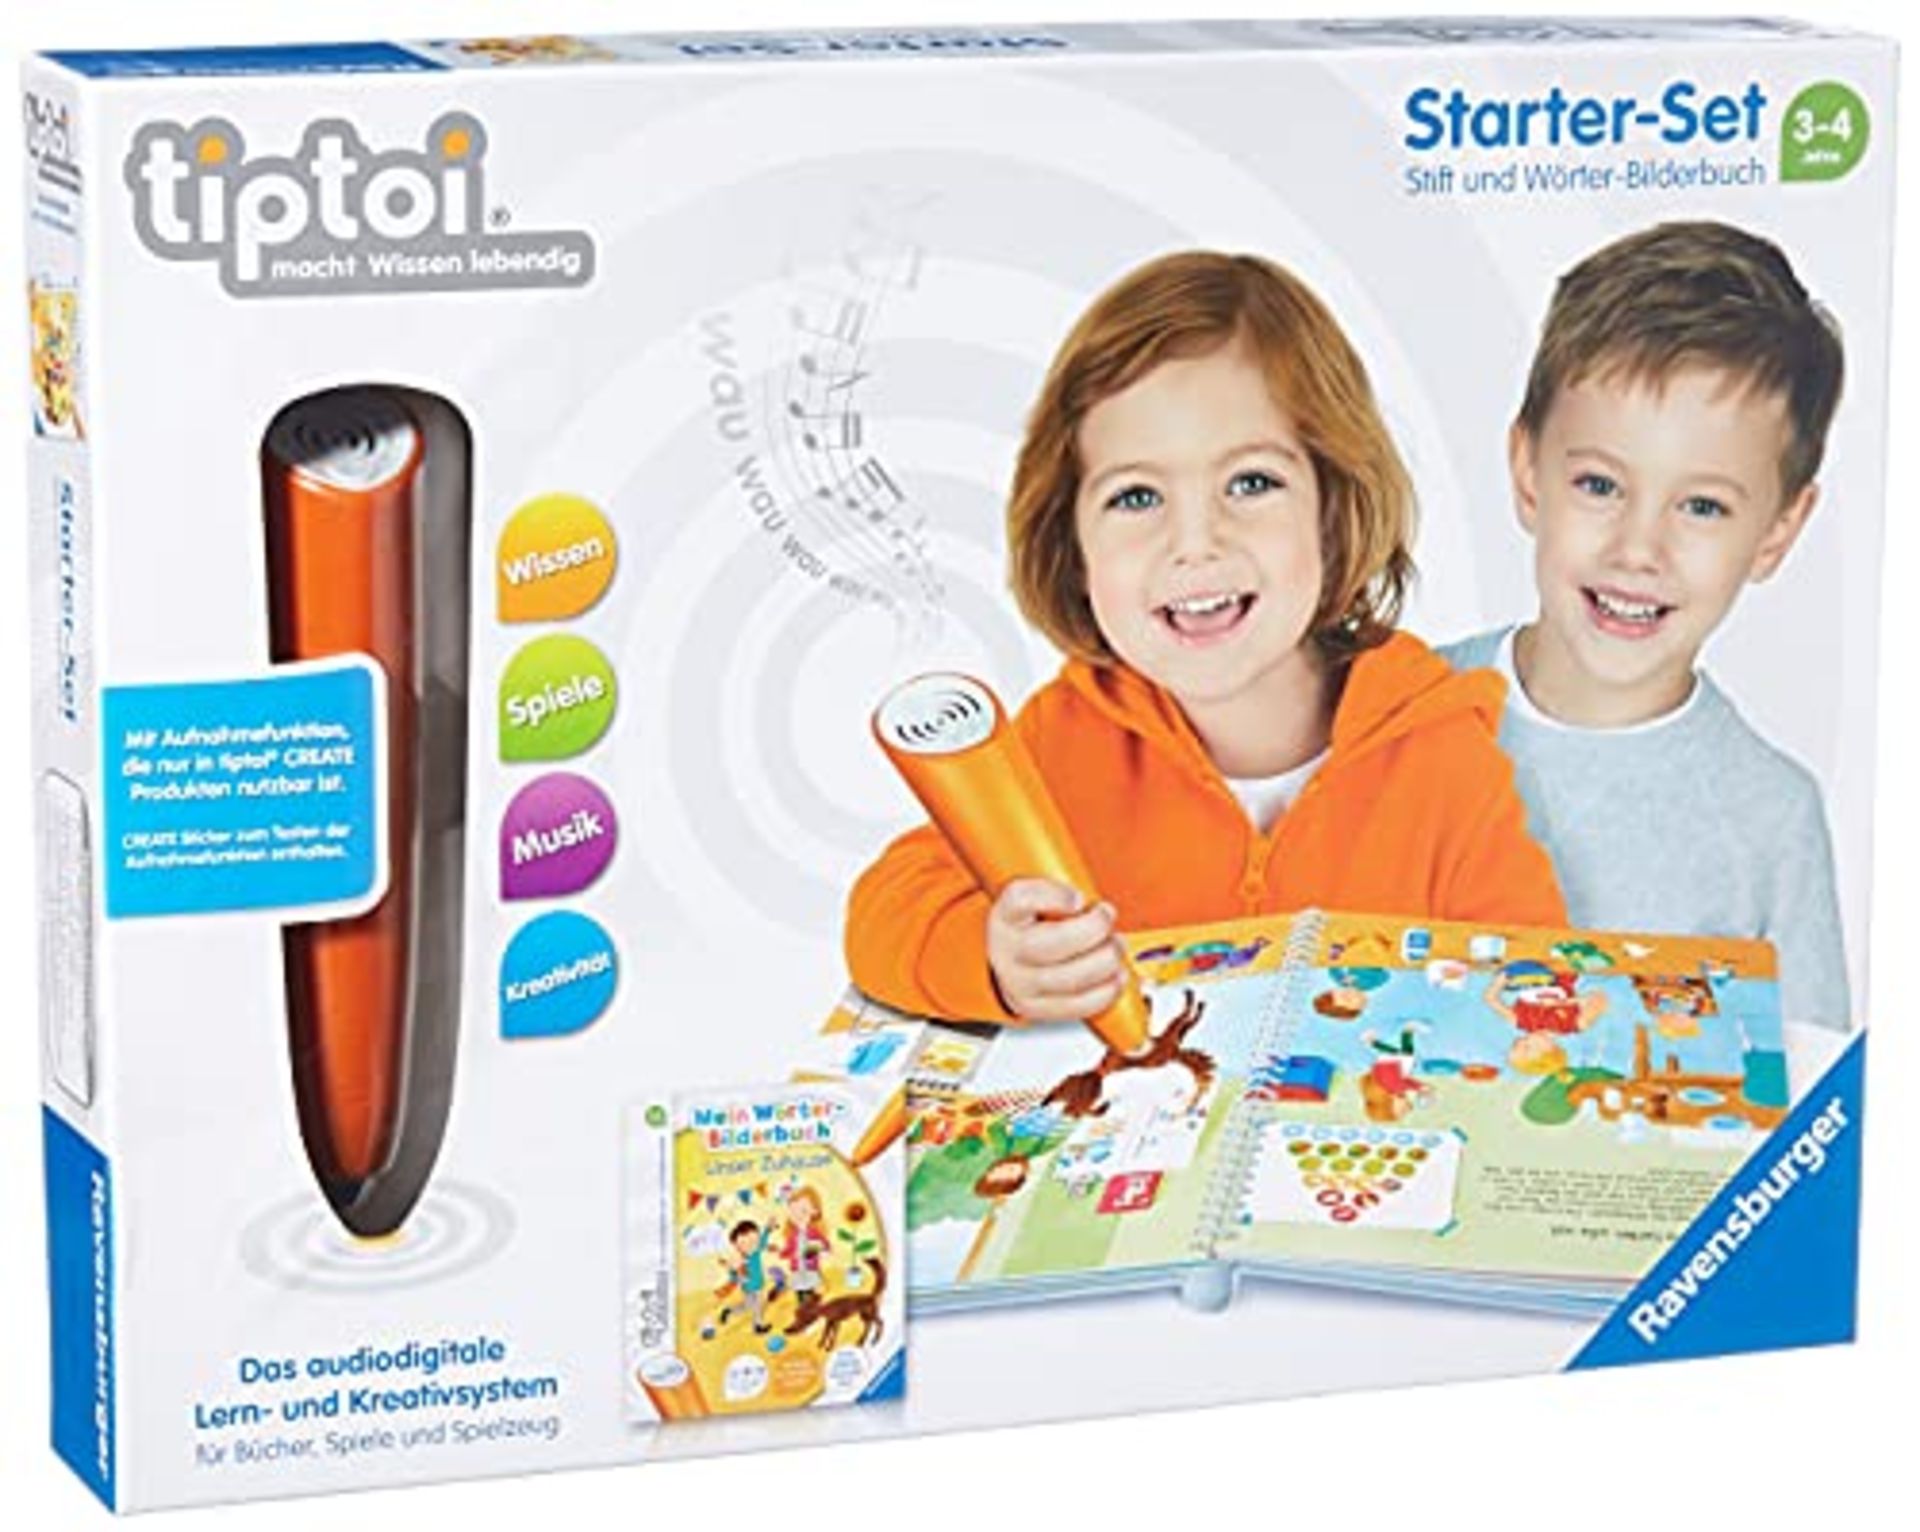 tiptoi® starter set pen and my word picture book Our home: tiptoi® pen with recordin